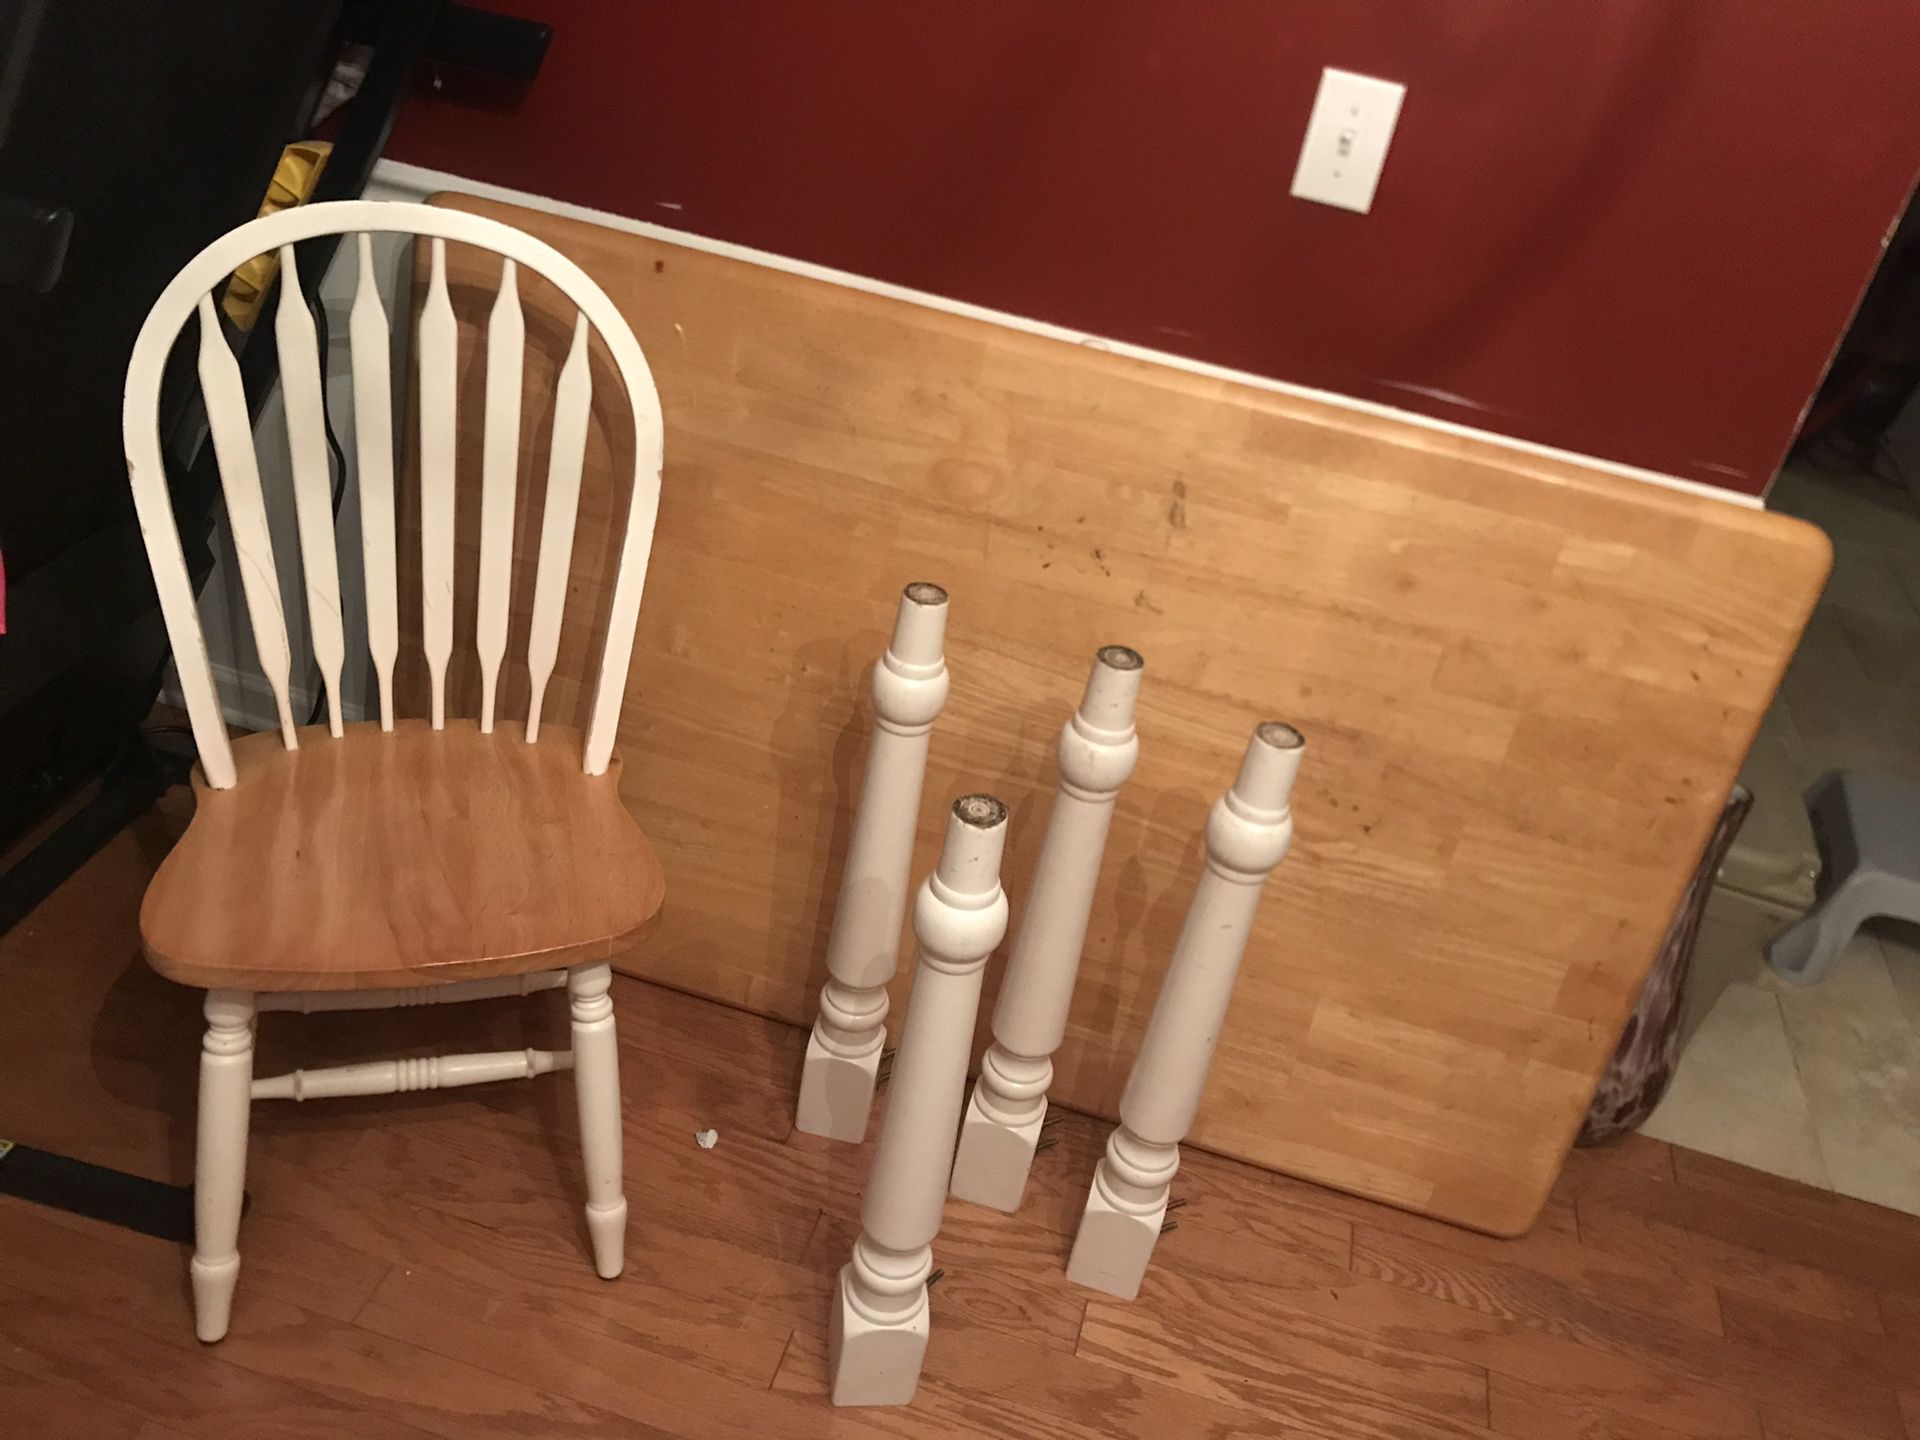 Free dining room table